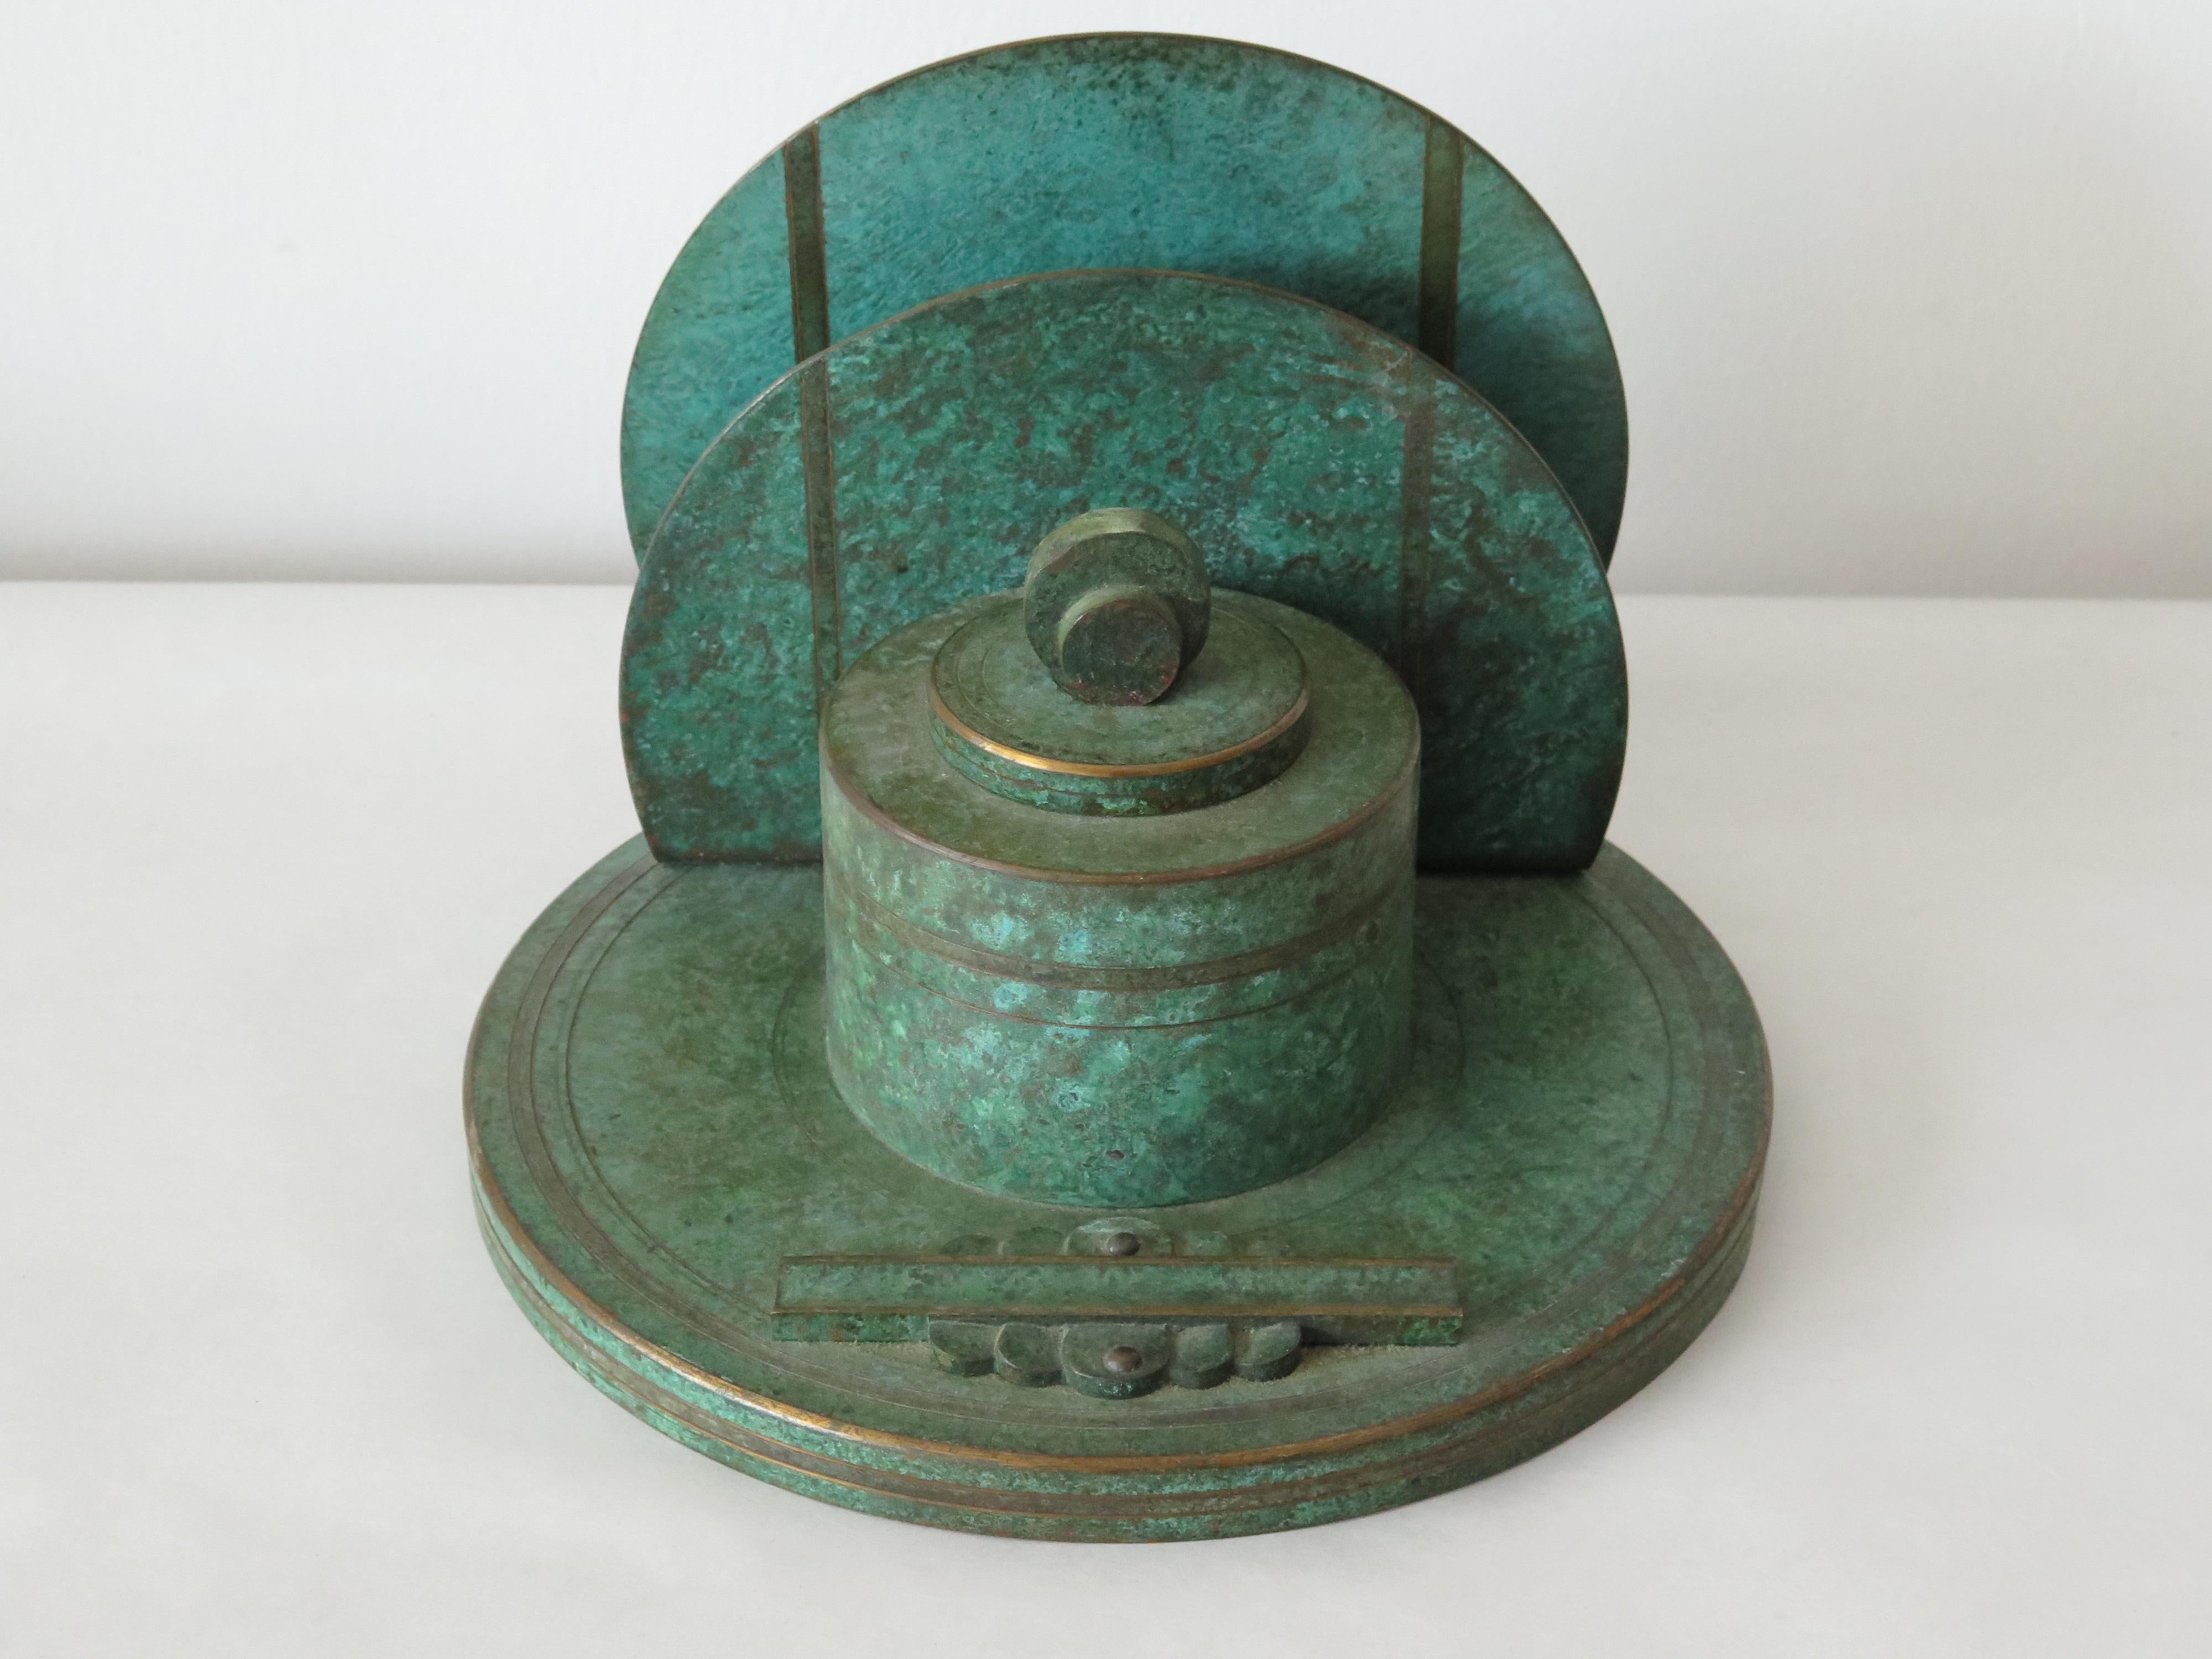 A rare and unusual Carl Sorensen collection of desk accessories-stamps, blotters, letter openers, ink blotters. Beautiful bronze patina and verdigris finish.